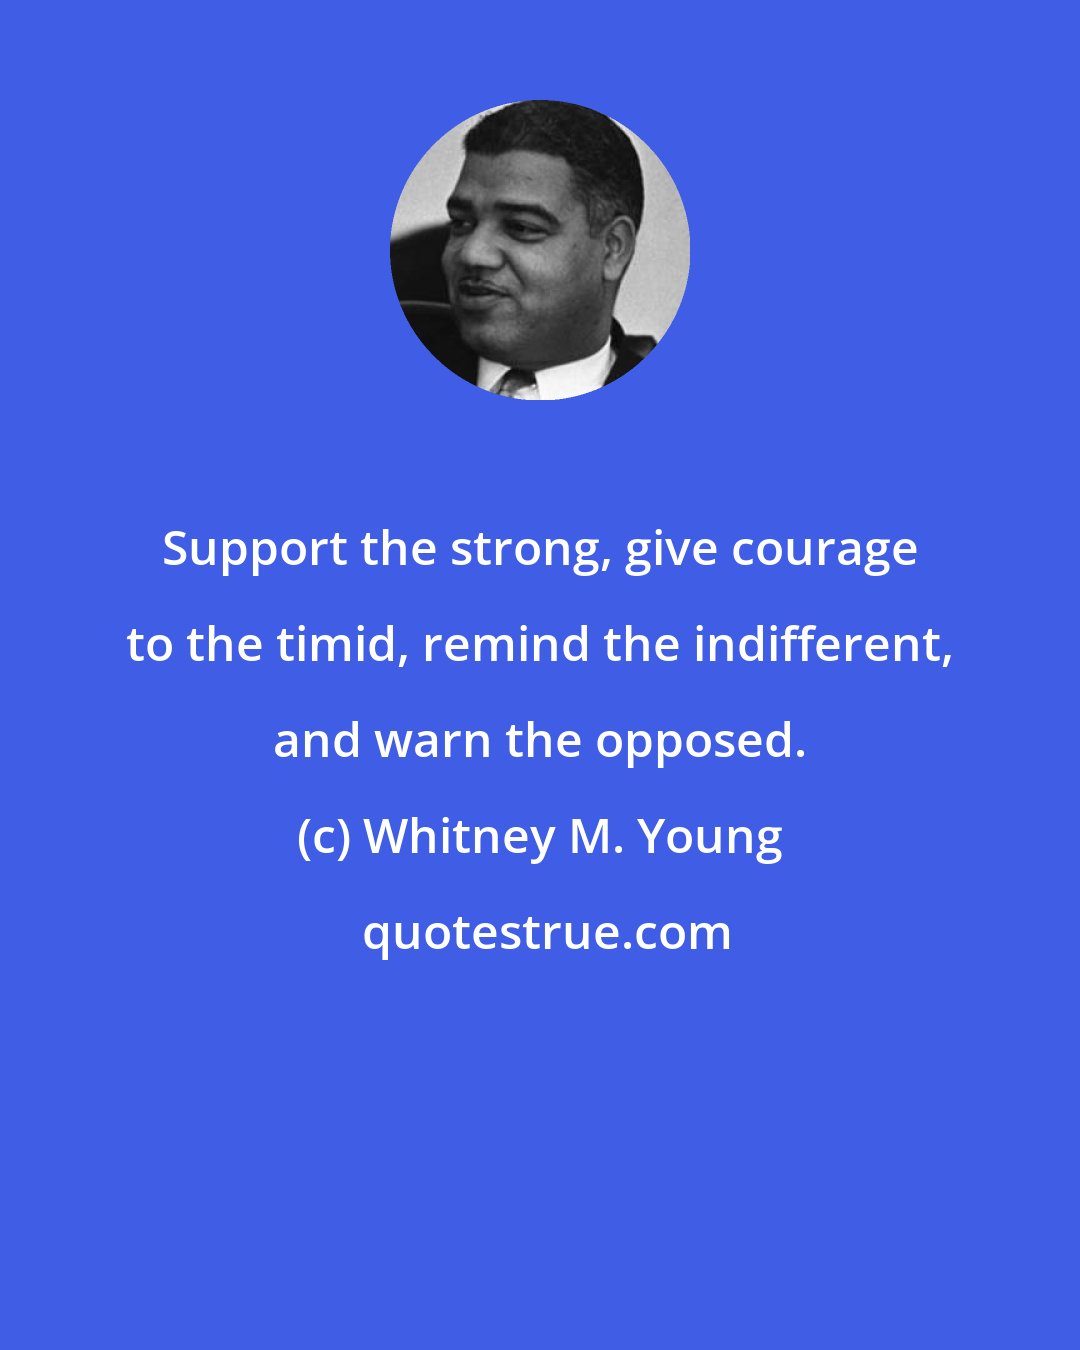 Whitney M. Young: Support the strong, give courage to the timid, remind the indifferent, and warn the opposed.